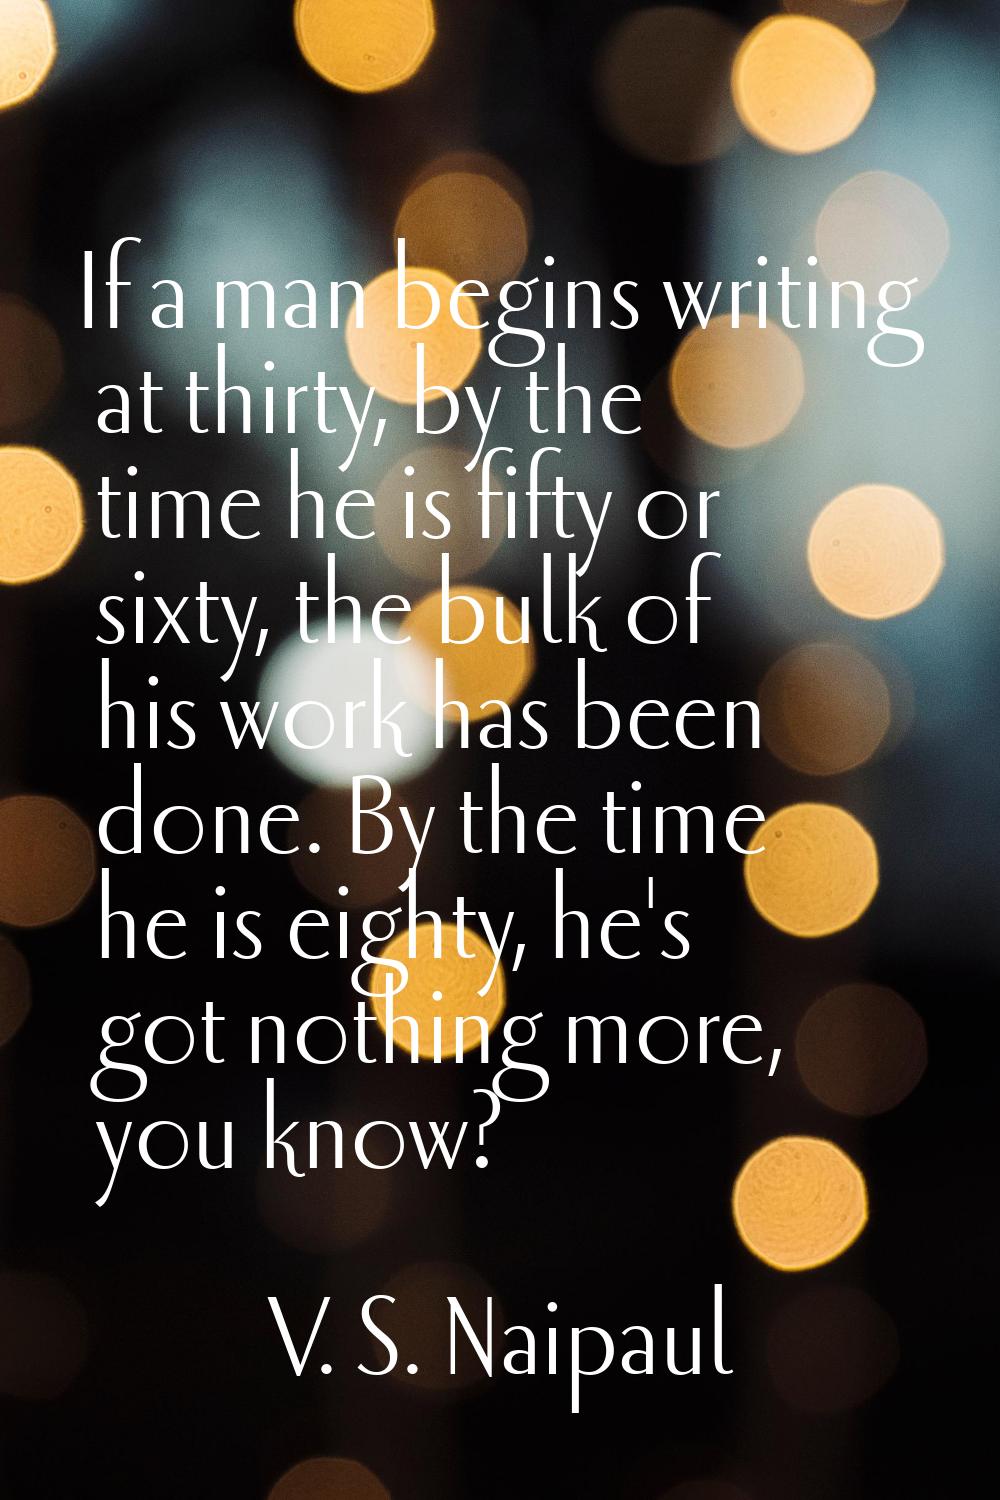 If a man begins writing at thirty, by the time he is fifty or sixty, the bulk of his work has been 